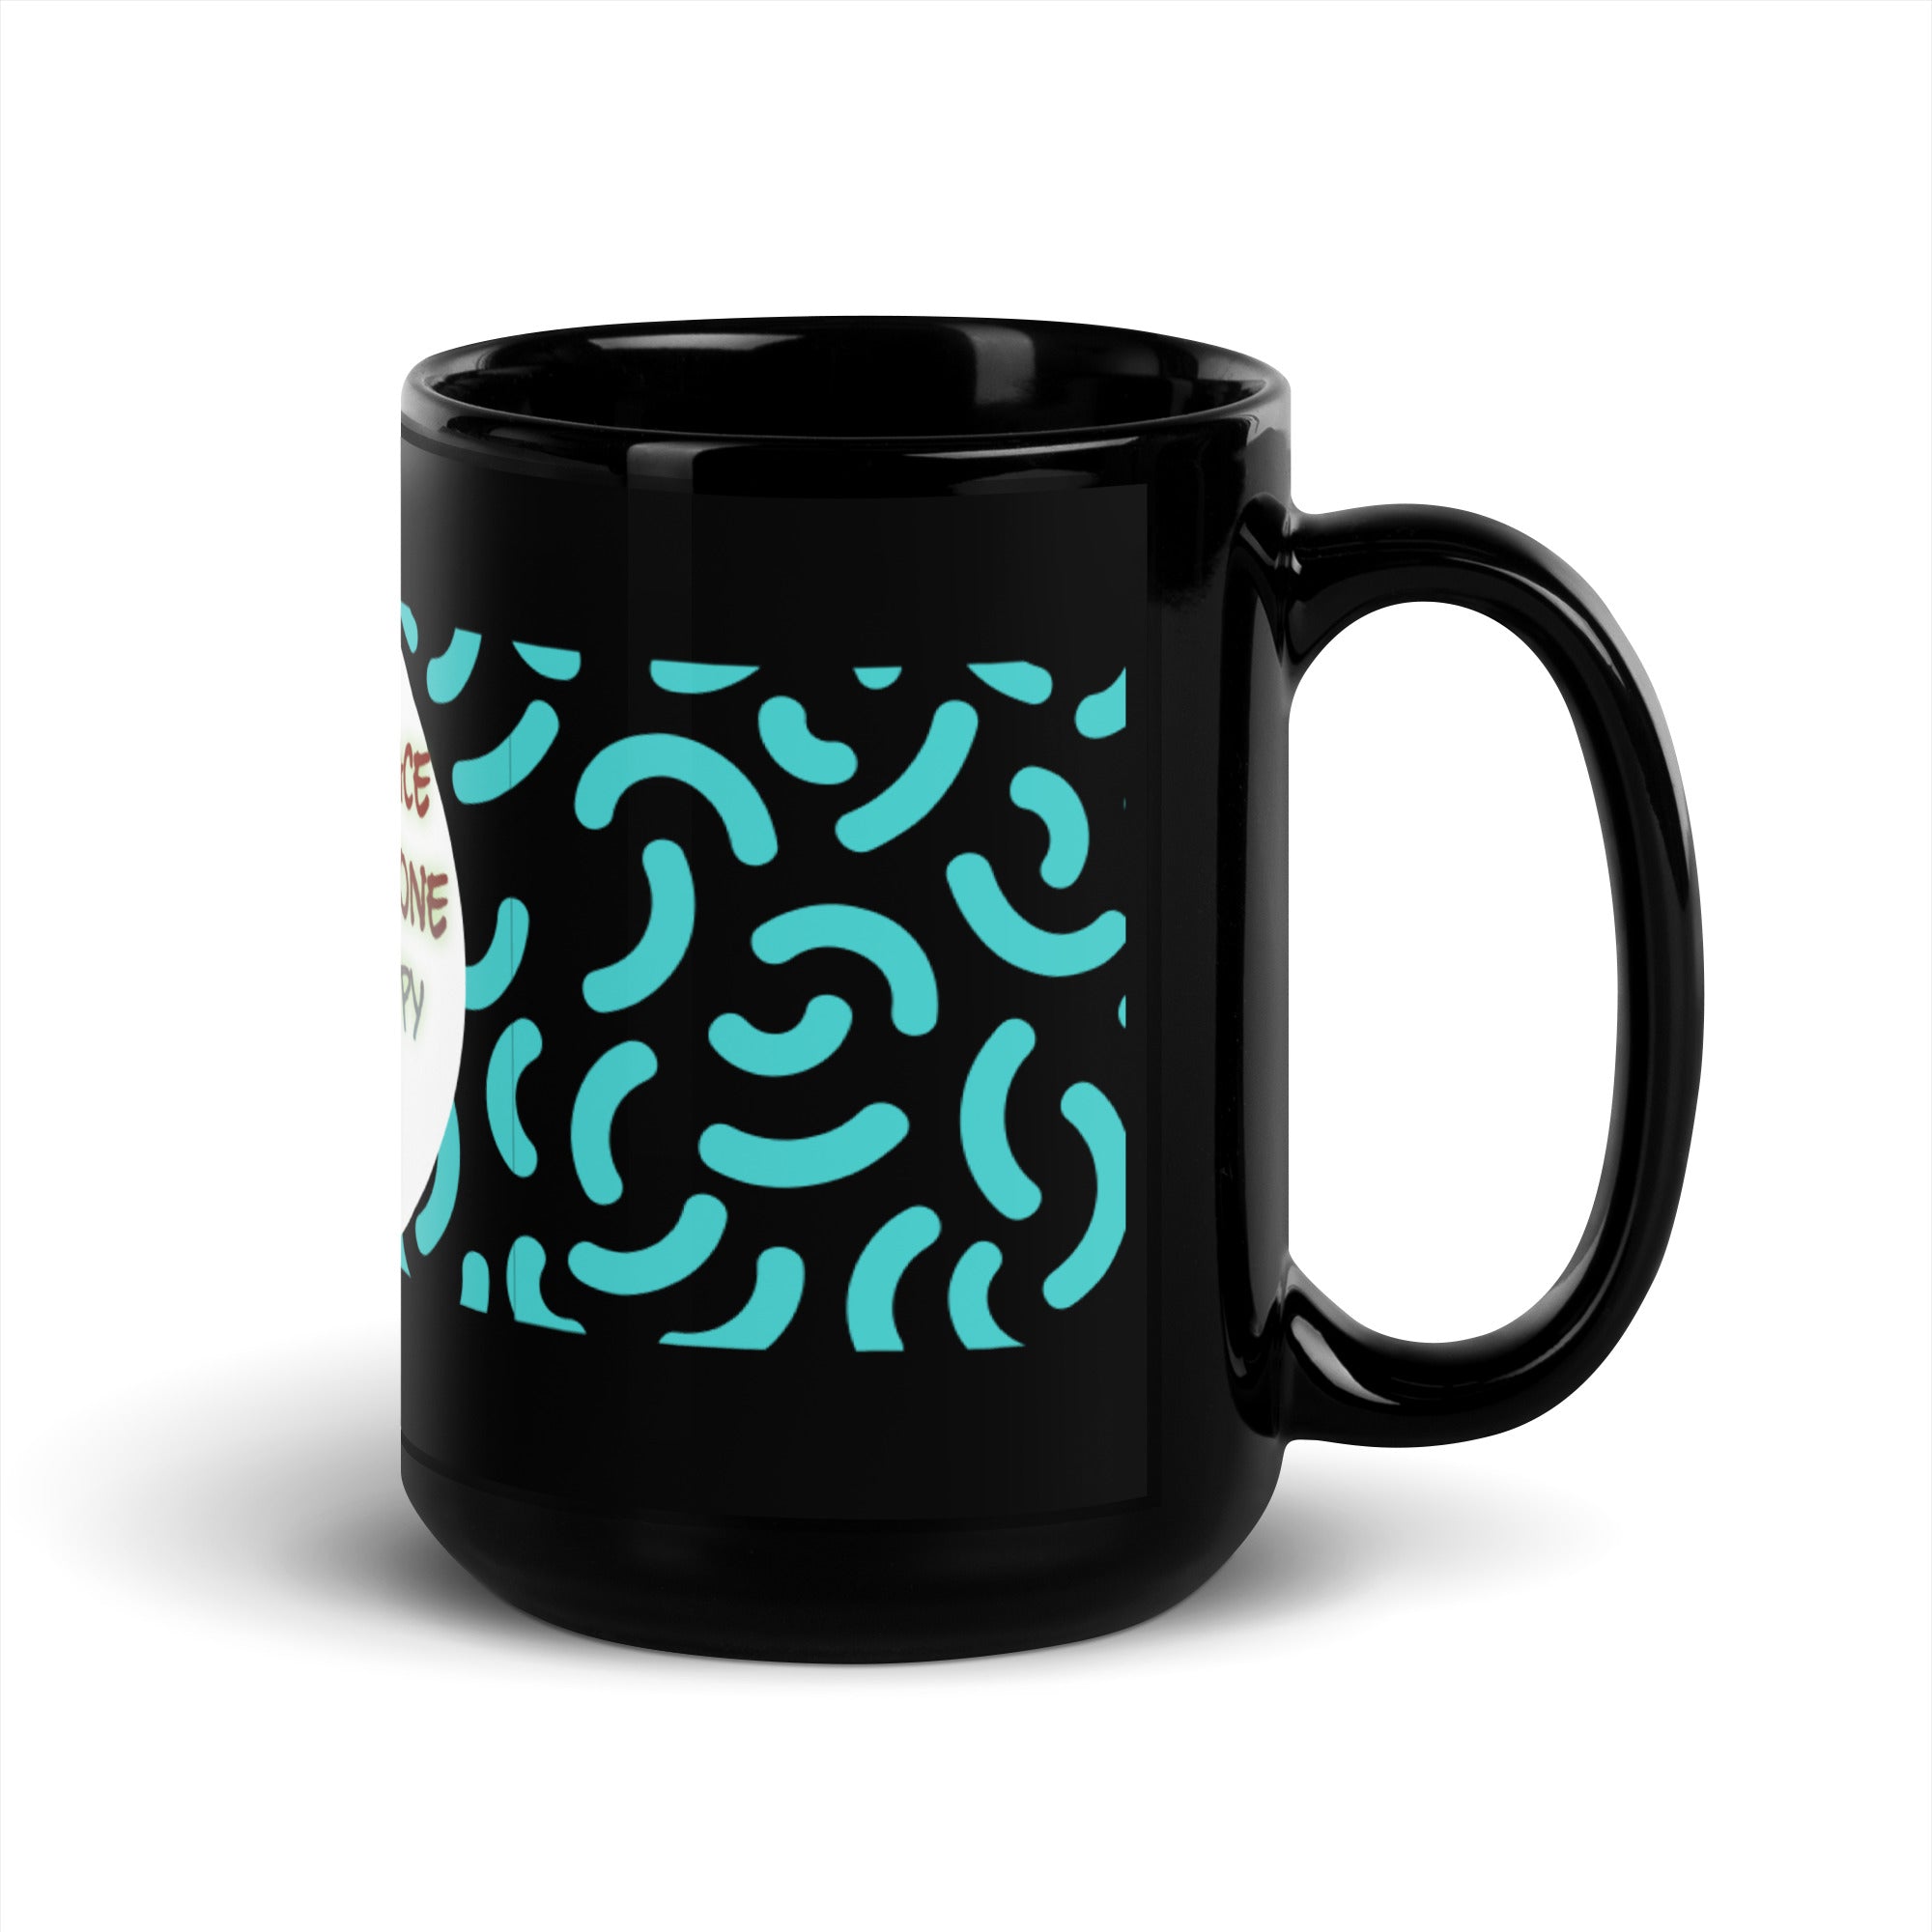 GloWell Designs - Black Glossy Mug - Motivational Quote - Live At Peace With Everyone - GloWell Designs